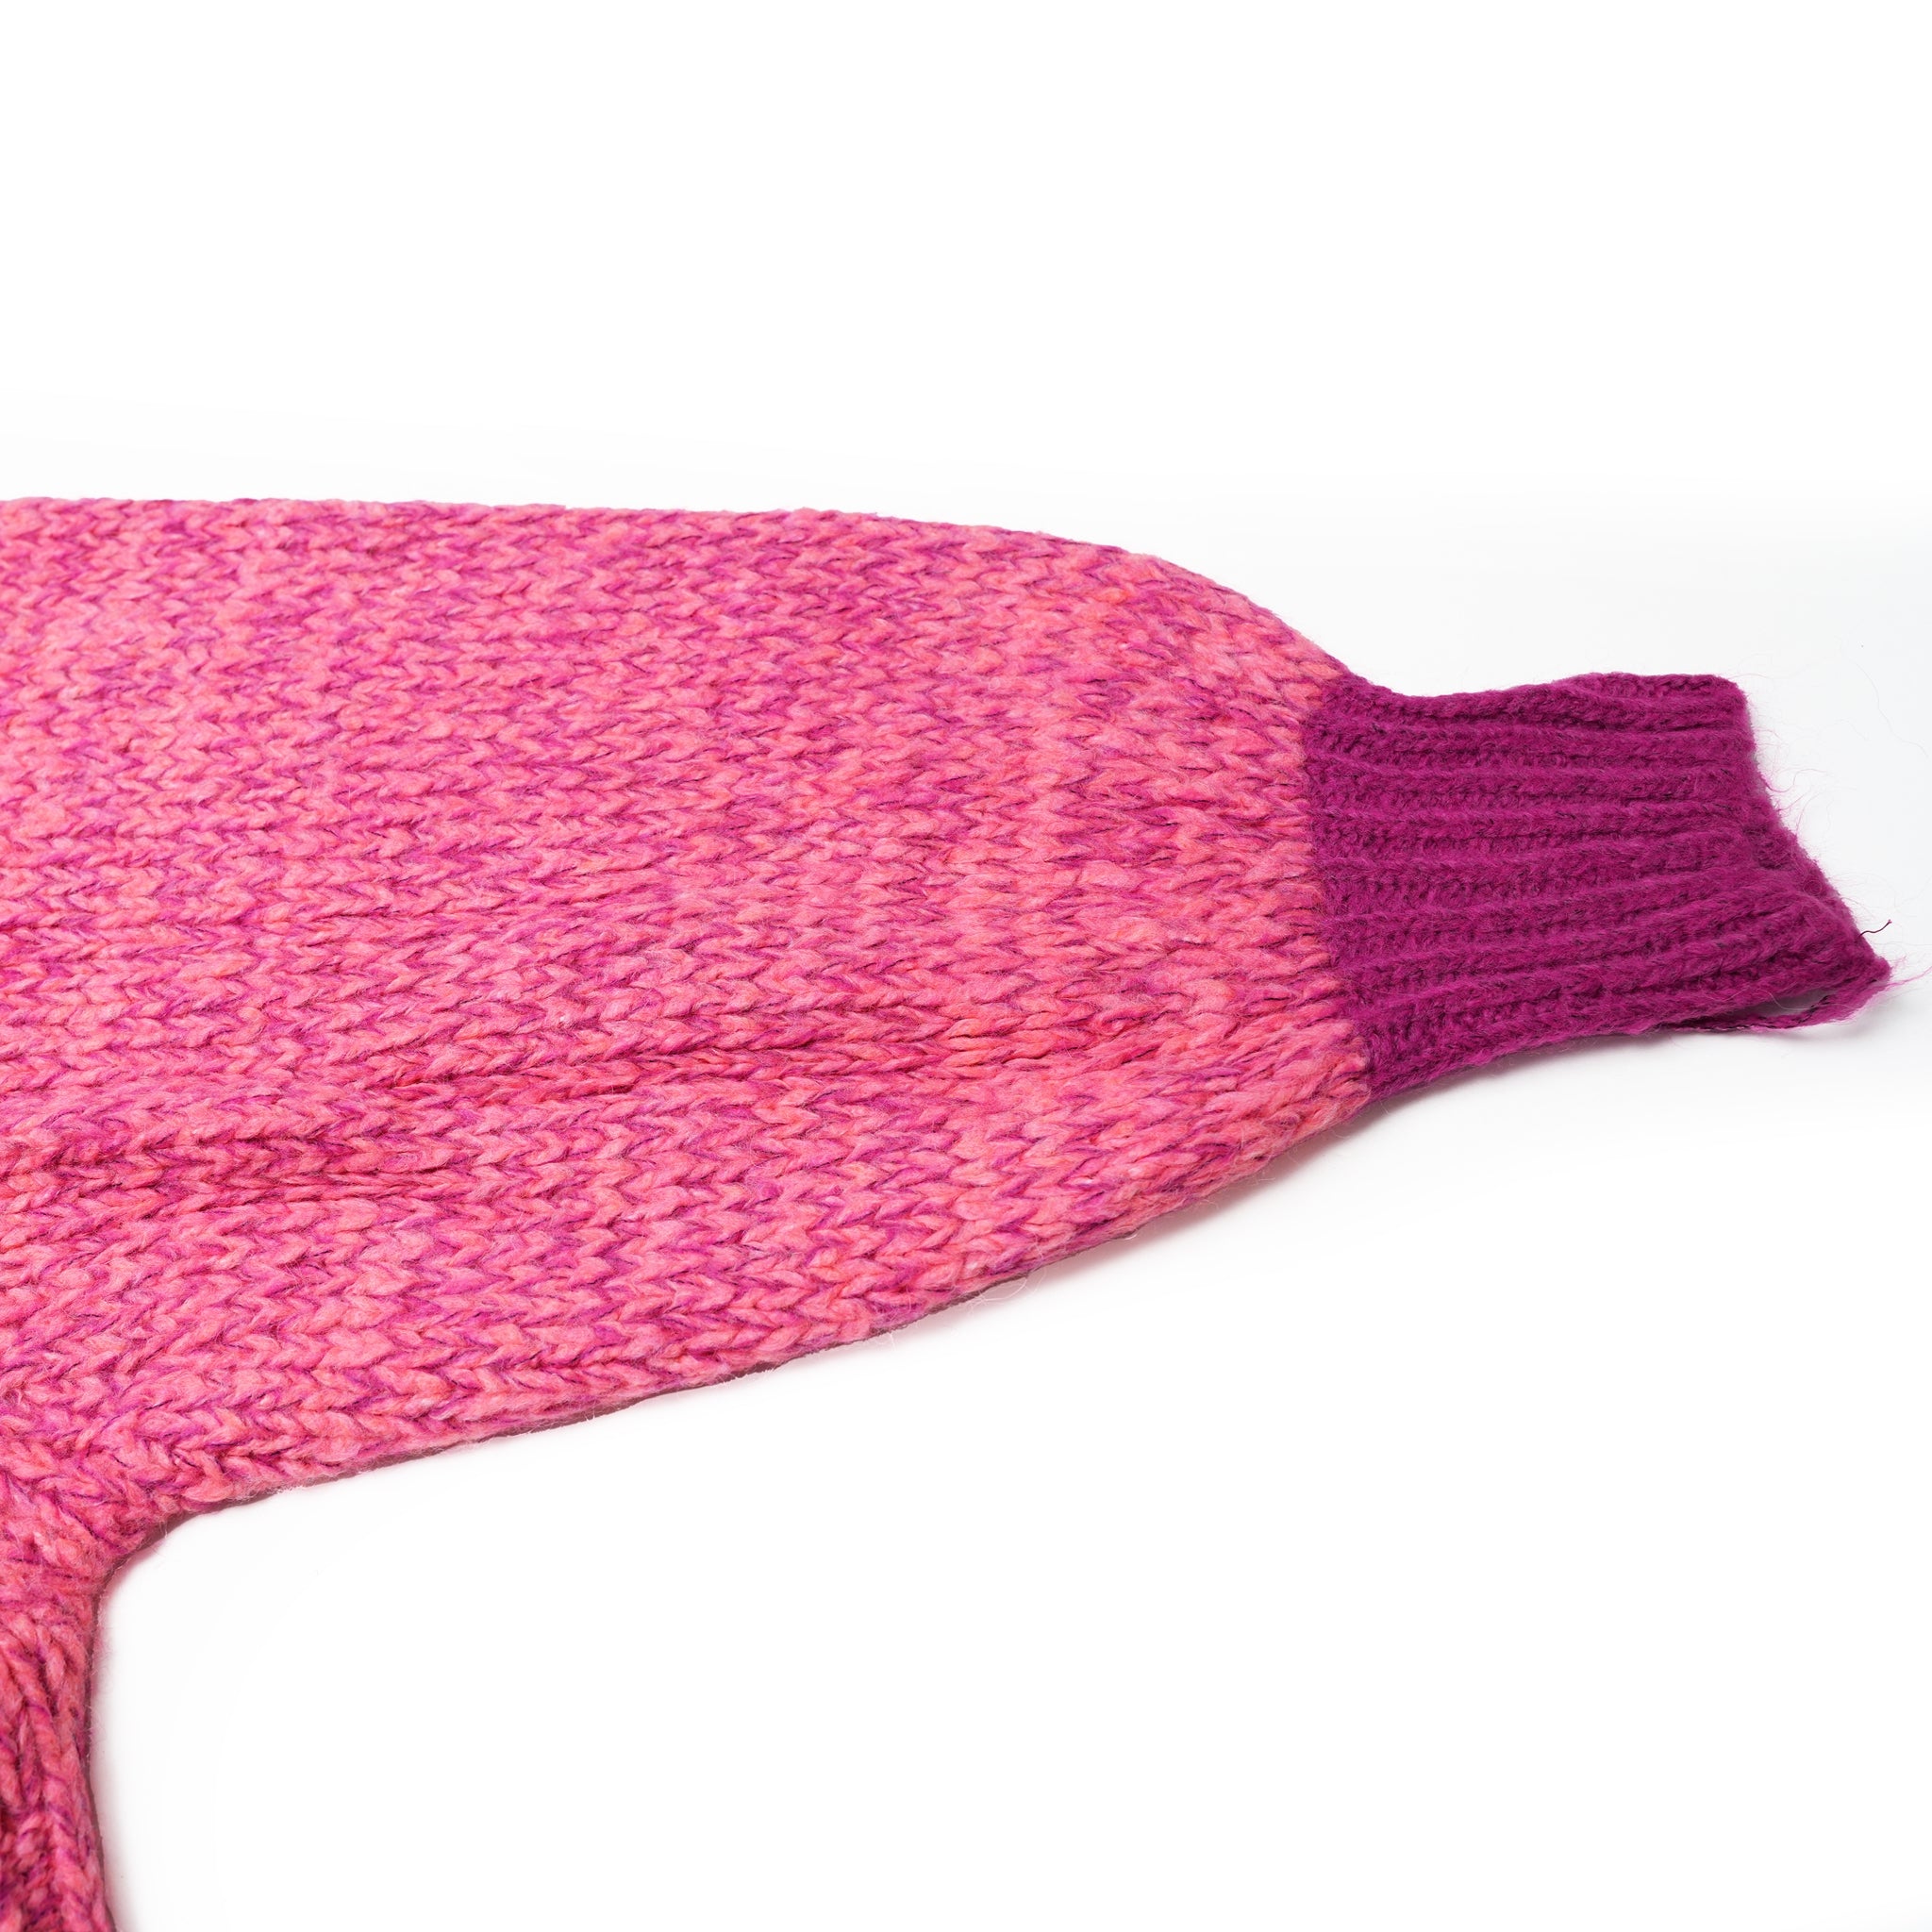 No:SP7445 | Name:CARDIGAN | Color:Fiery Pink【POM AMSTERDAM_ポムアムステルダム】